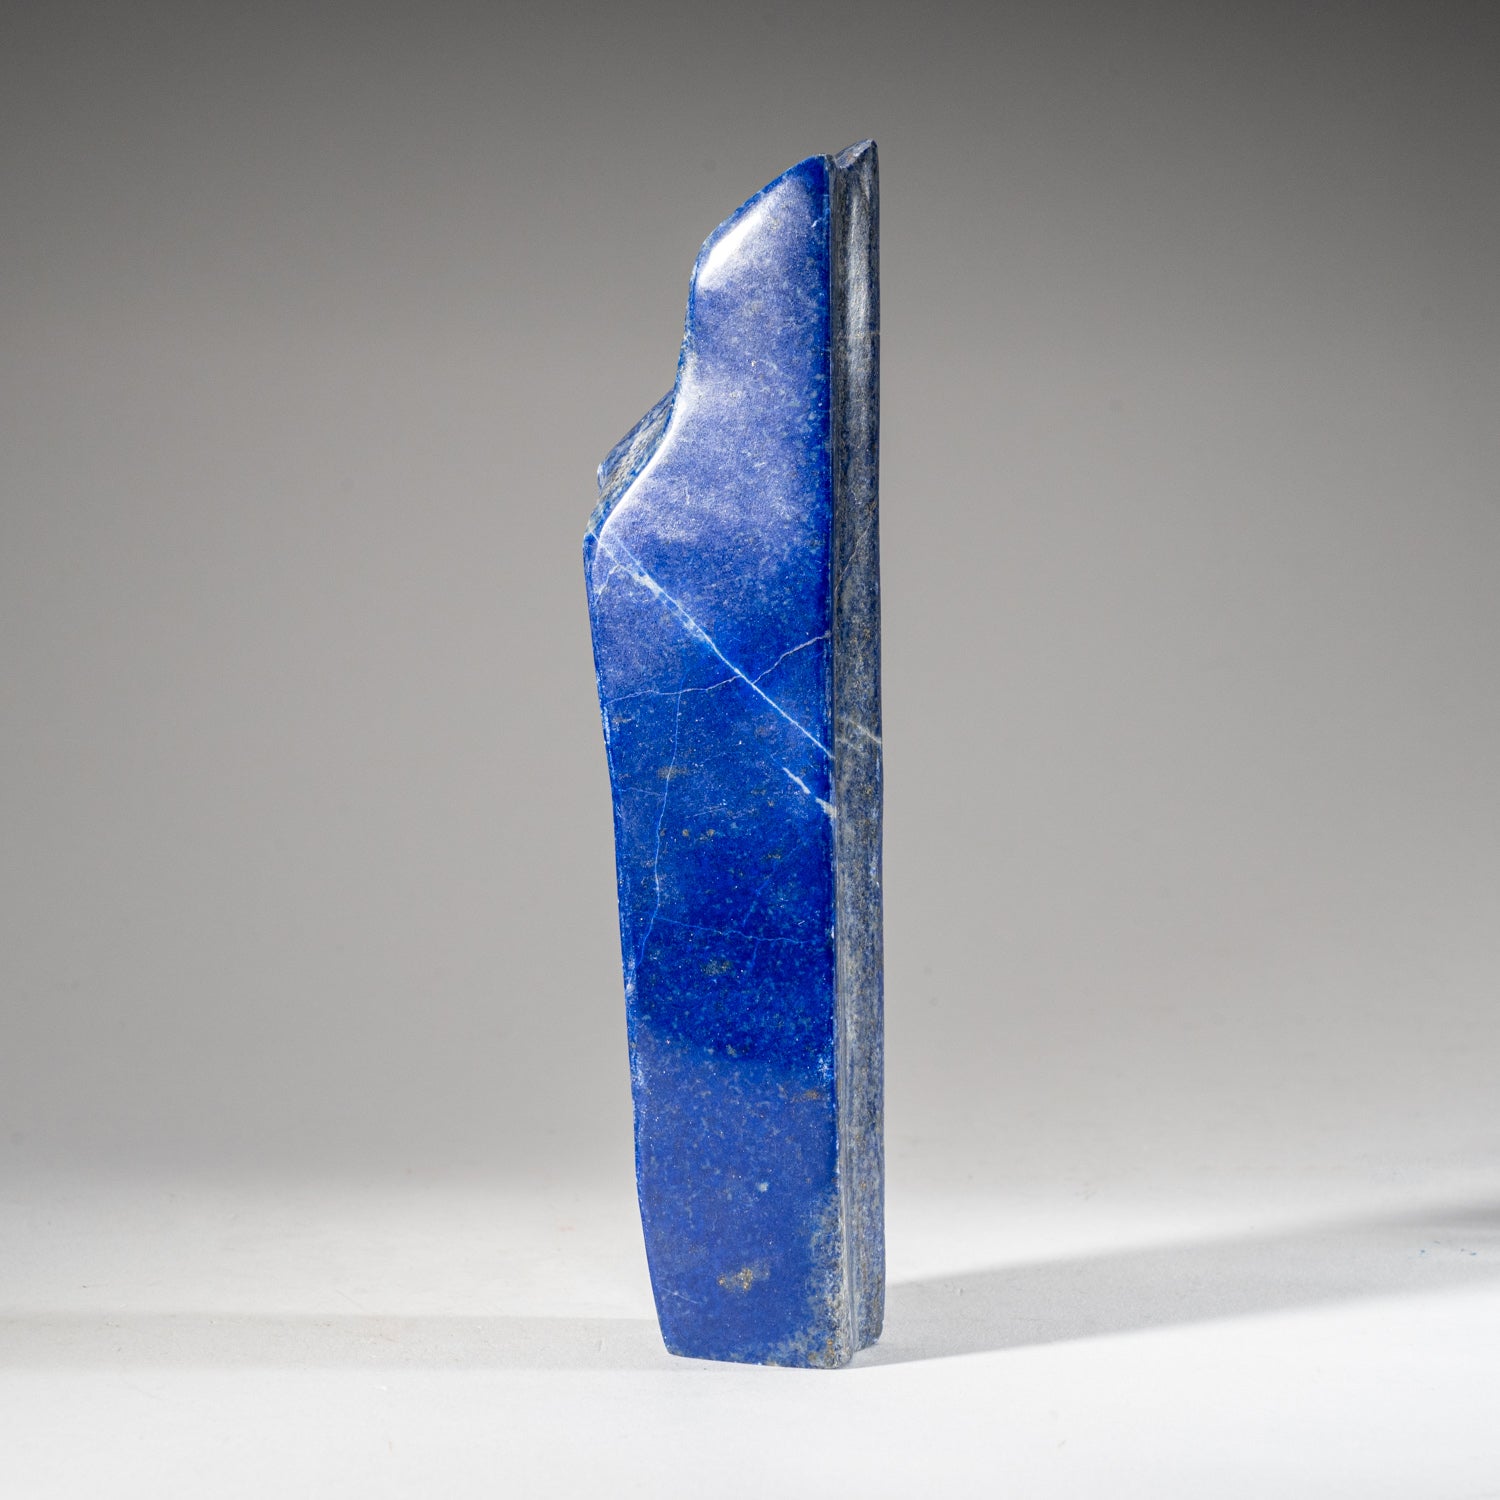 Polished Lapis Lazuli Freeform from Afghanistan (359 grams)